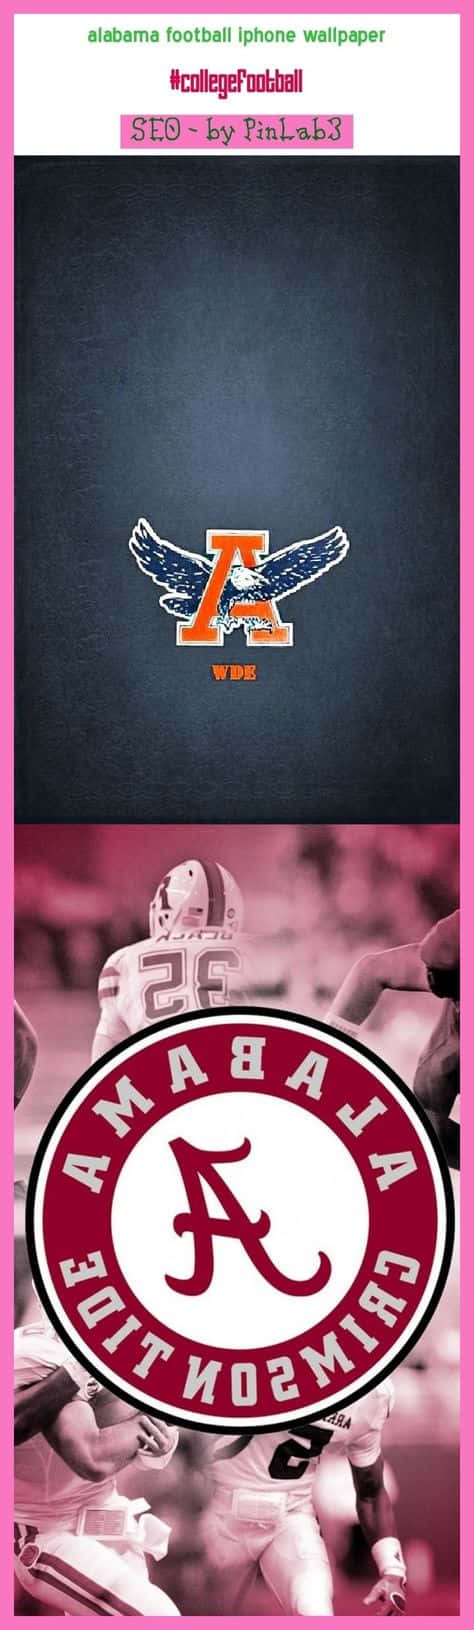 Get Ready Alabama Fans! The Official Alabama Football Iphone App is Available Now Wallpaper